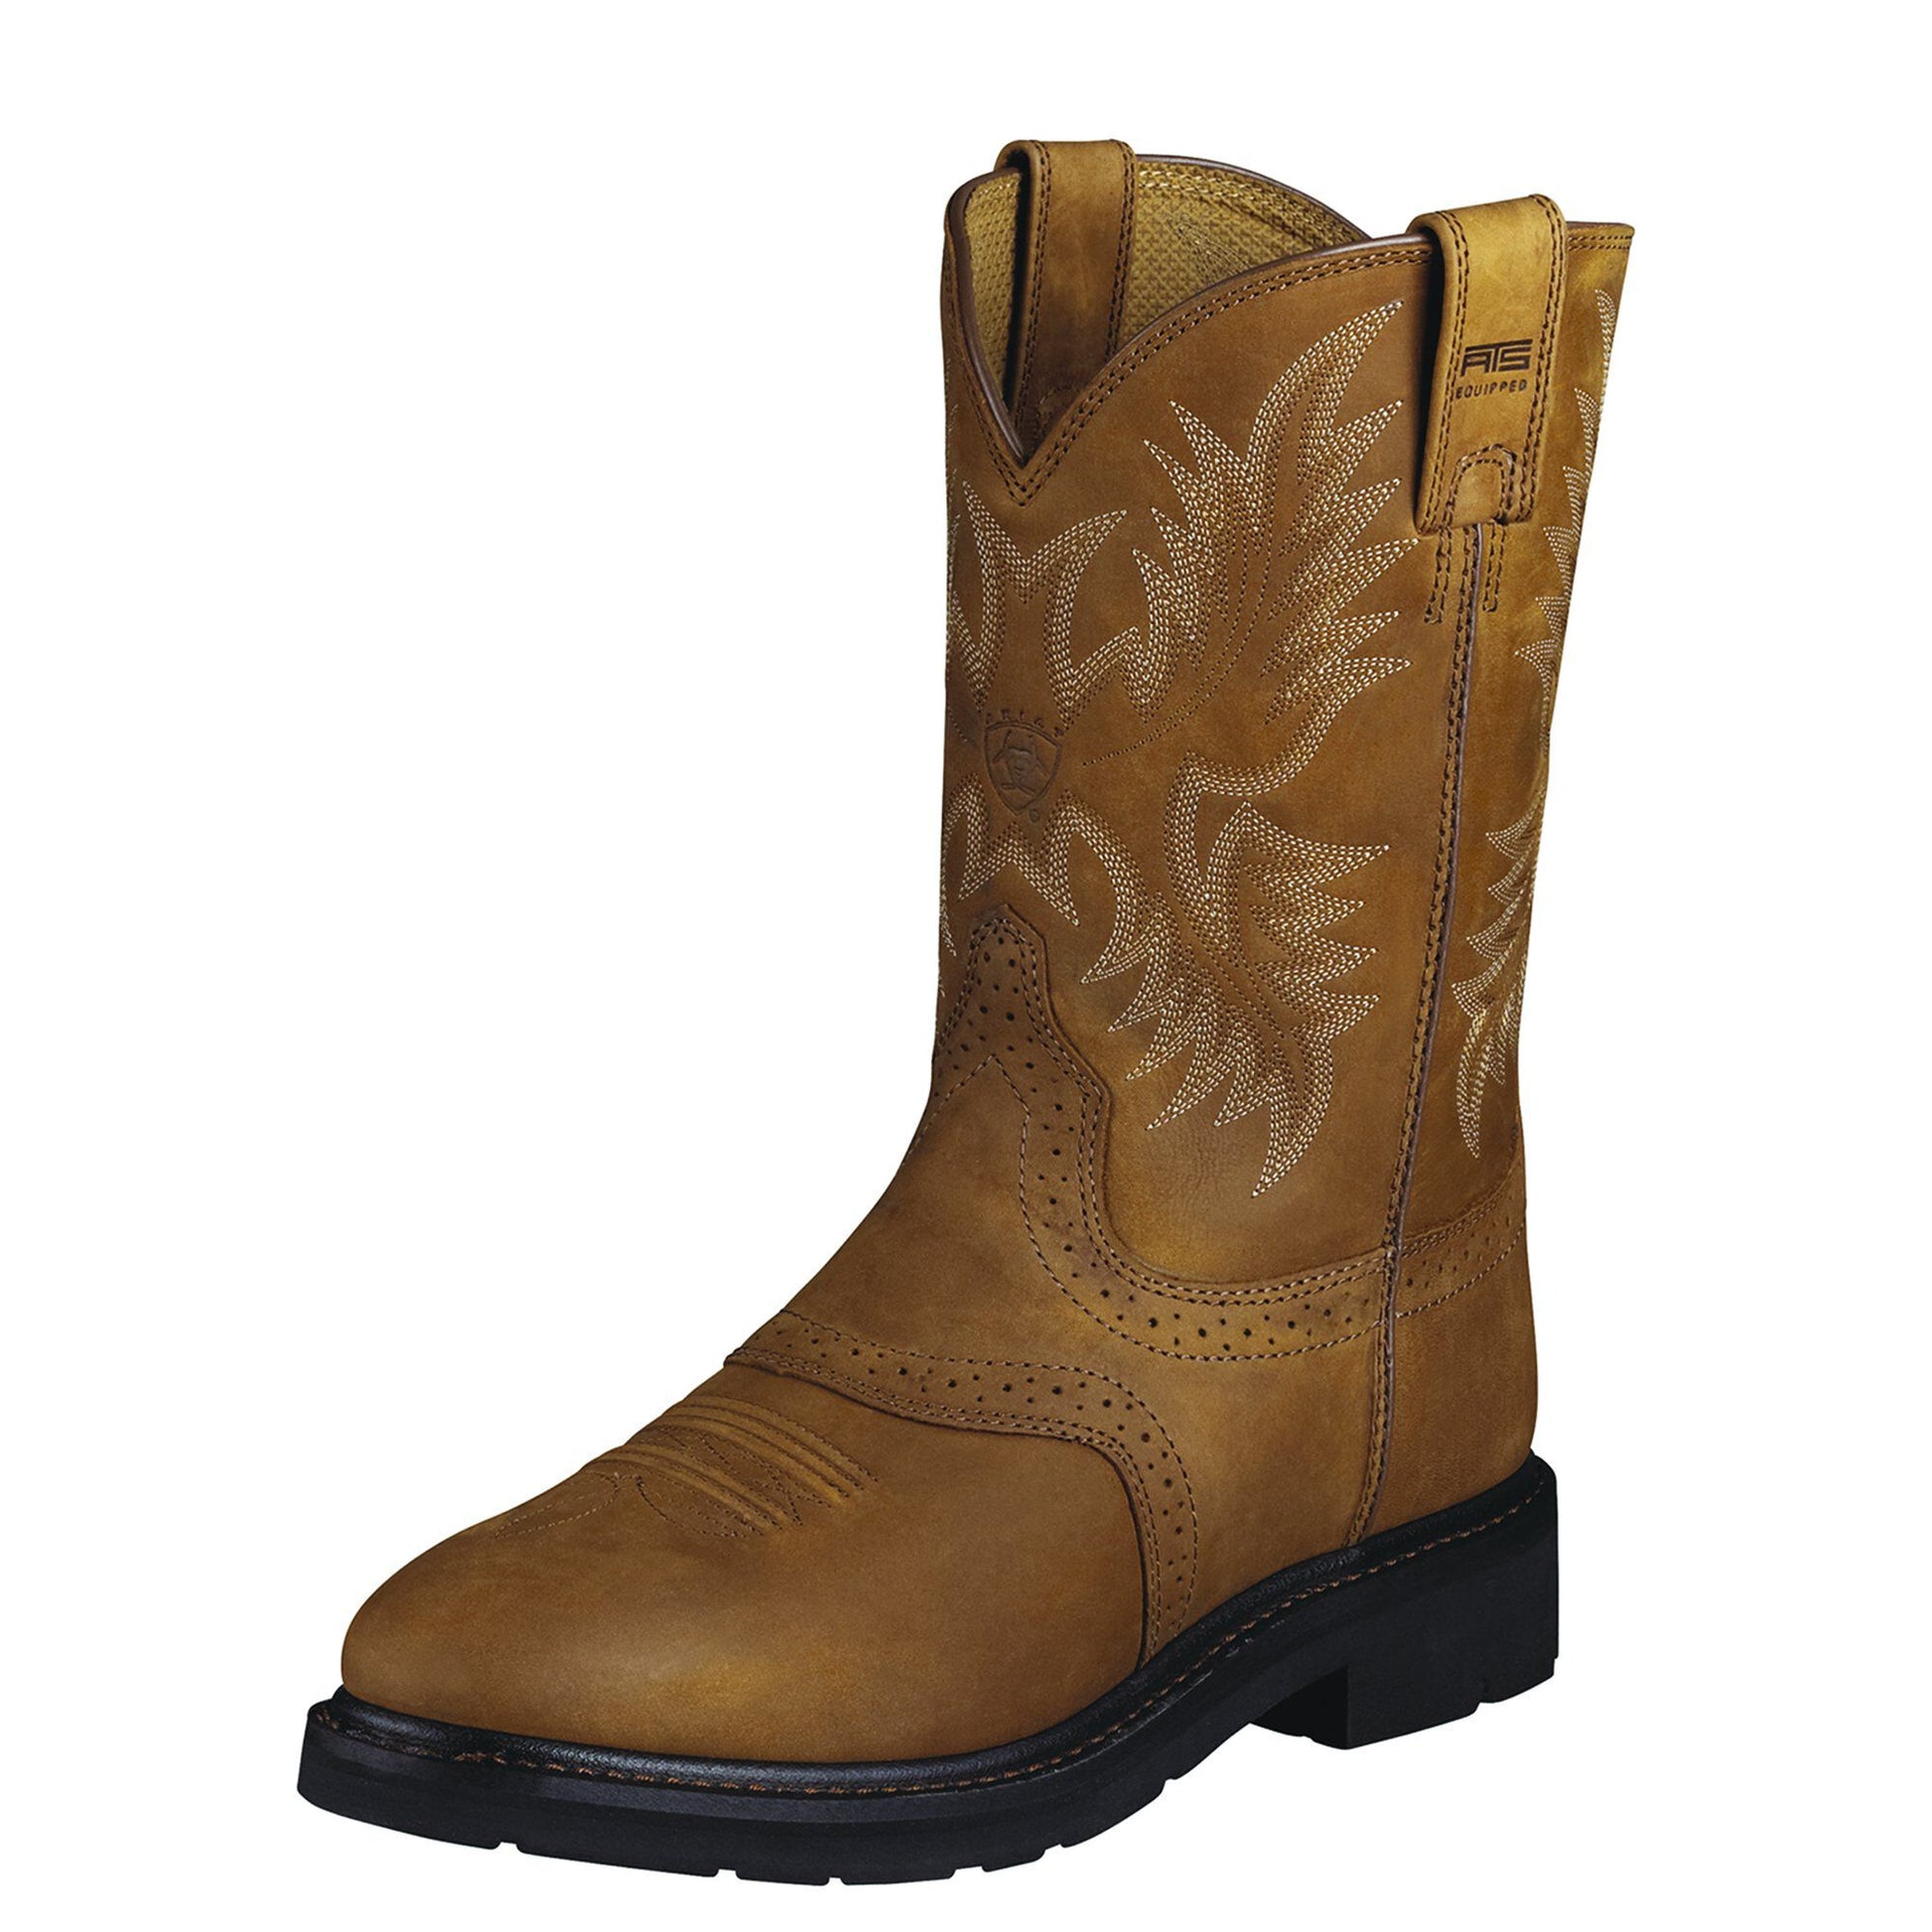 Ariat Men's Sierra Saddle Boot - Aged Bark - French's Boots